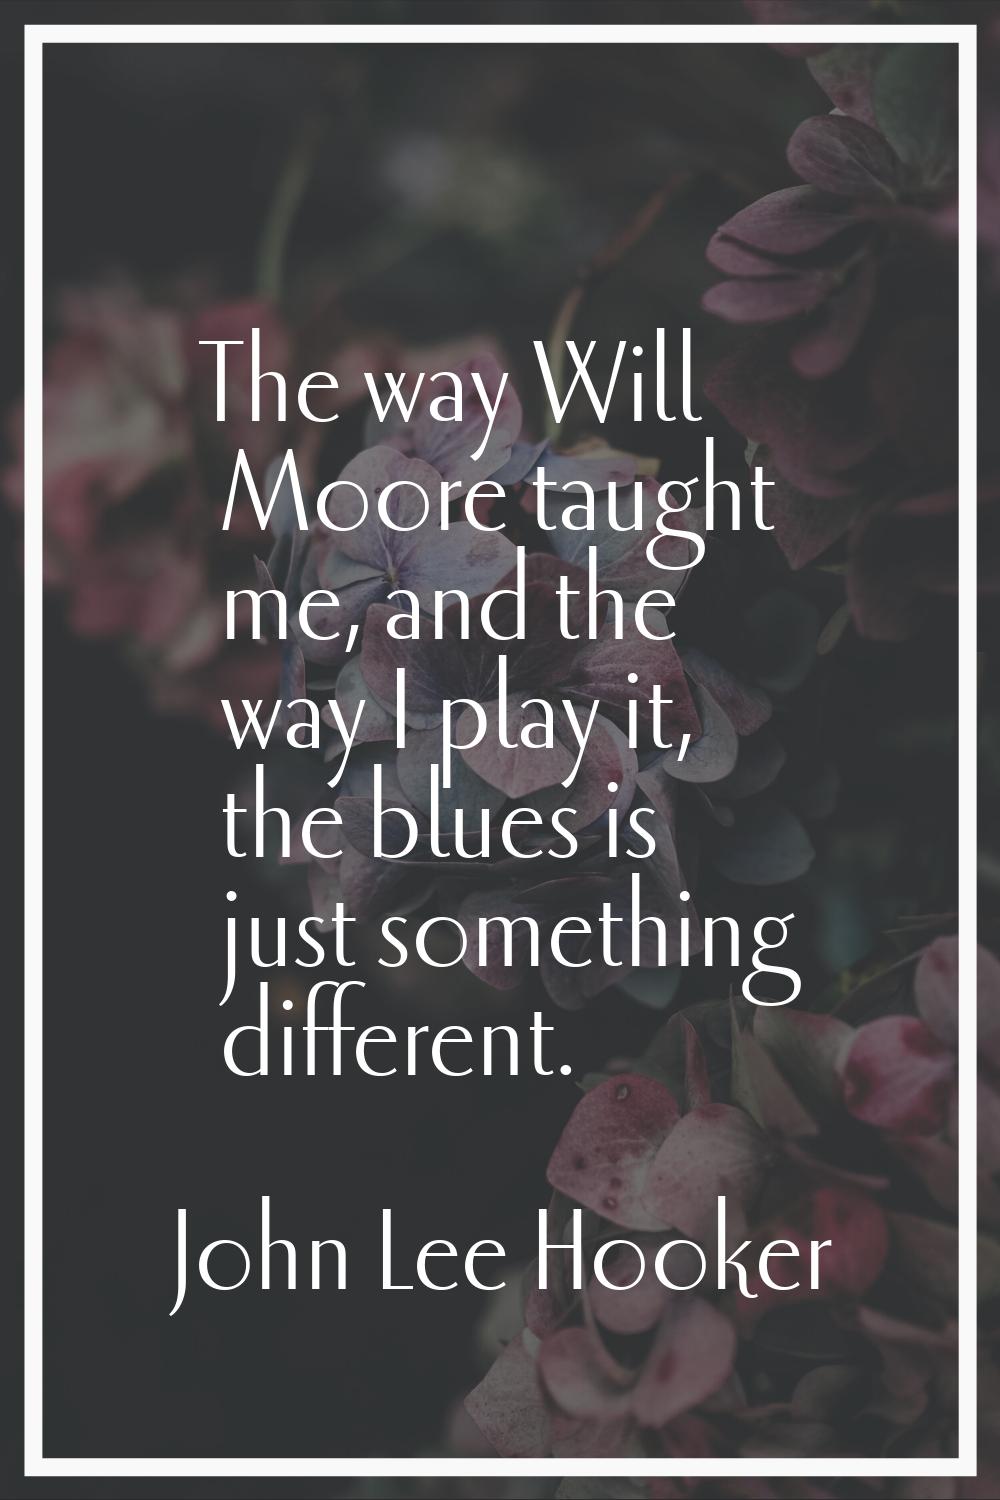 The way Will Moore taught me, and the way I play it, the blues is just something different.